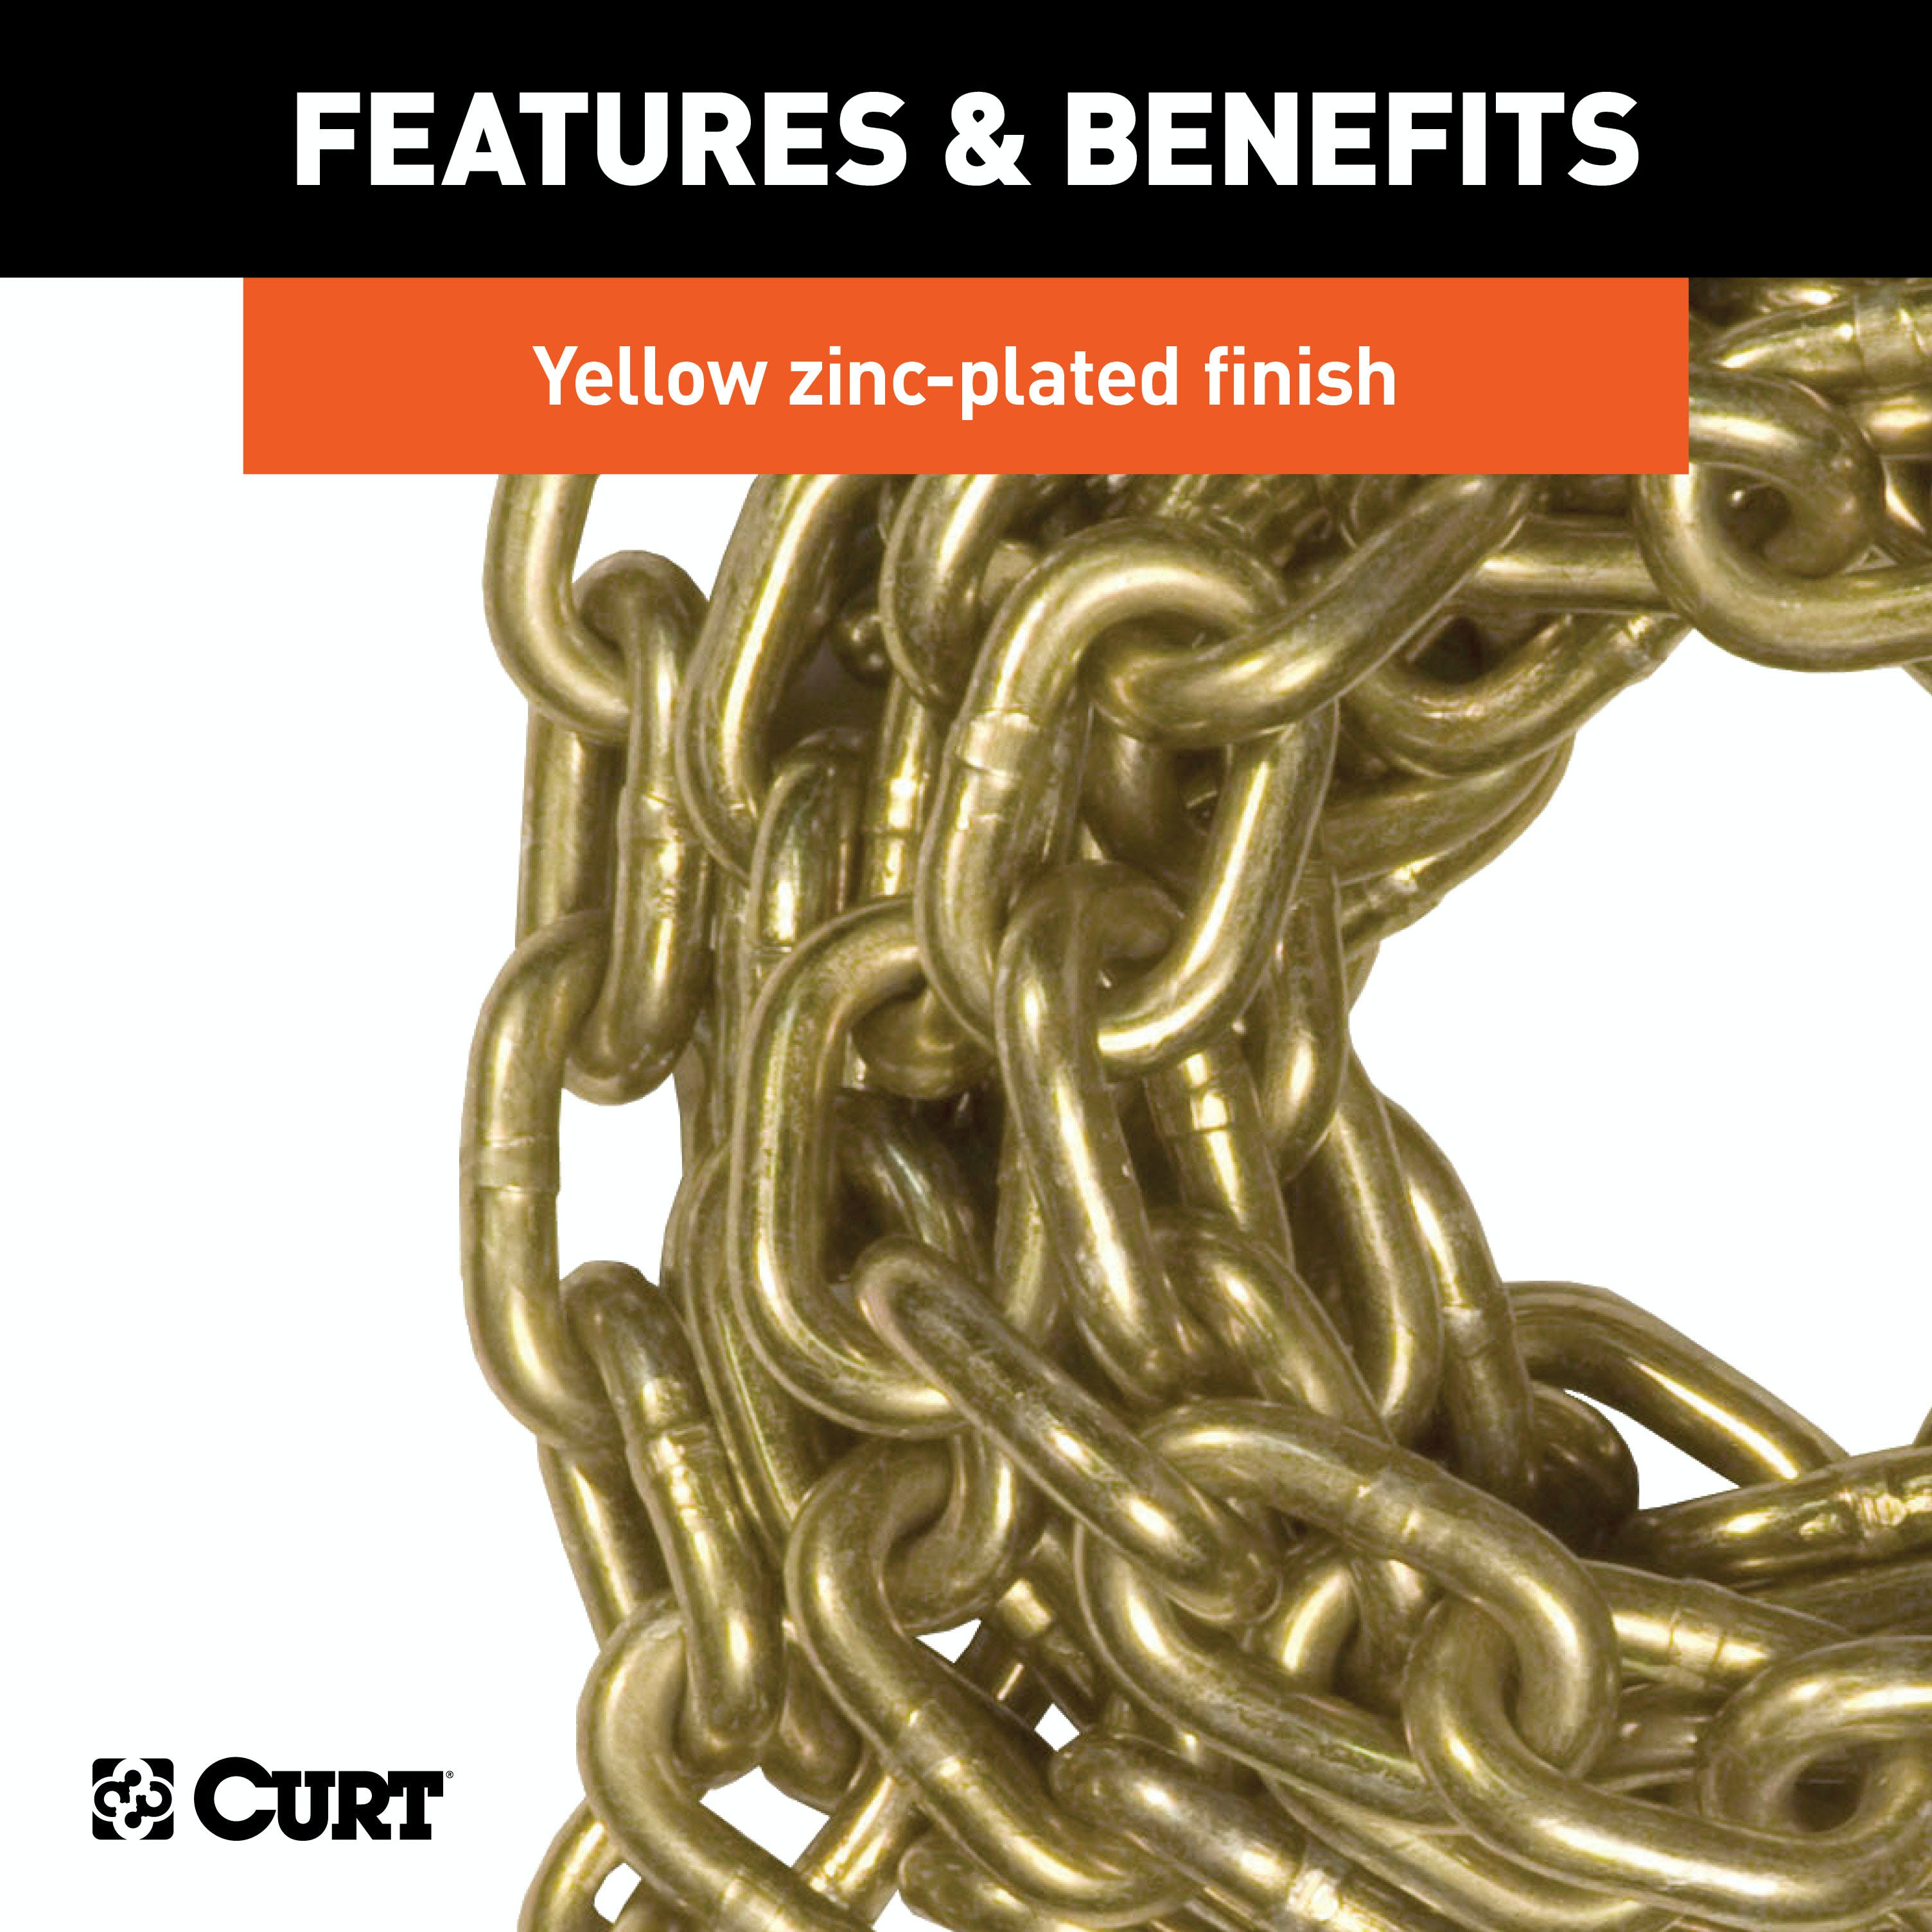 CURT 80307 20' Transport Binder Safety Chain with 2 Clevis Hooks (18,800 lbs, Yellow Zinc)